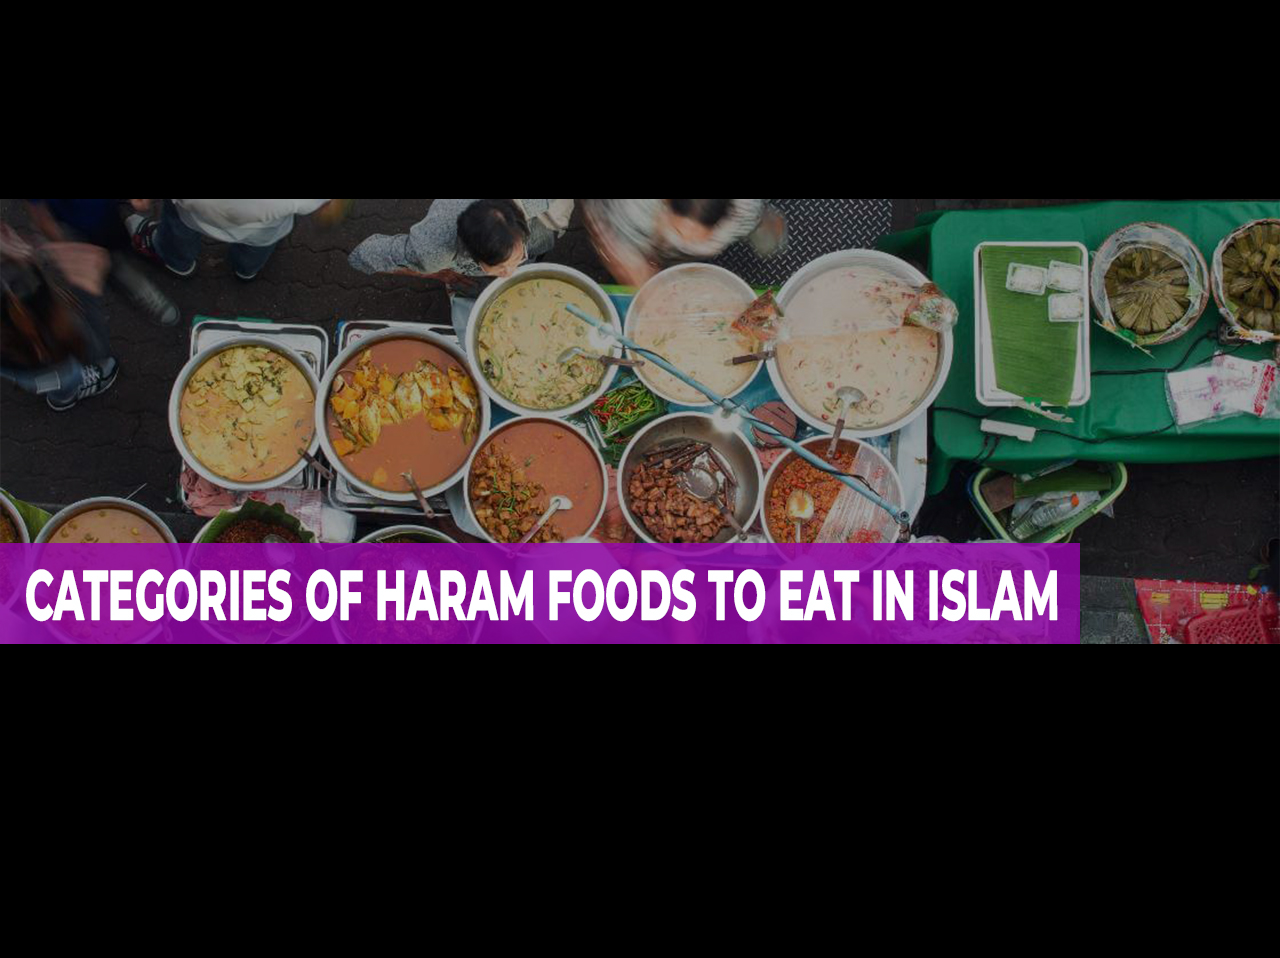 CATEGORIES OF HARAM FOODS TO EAT IN ISLAM